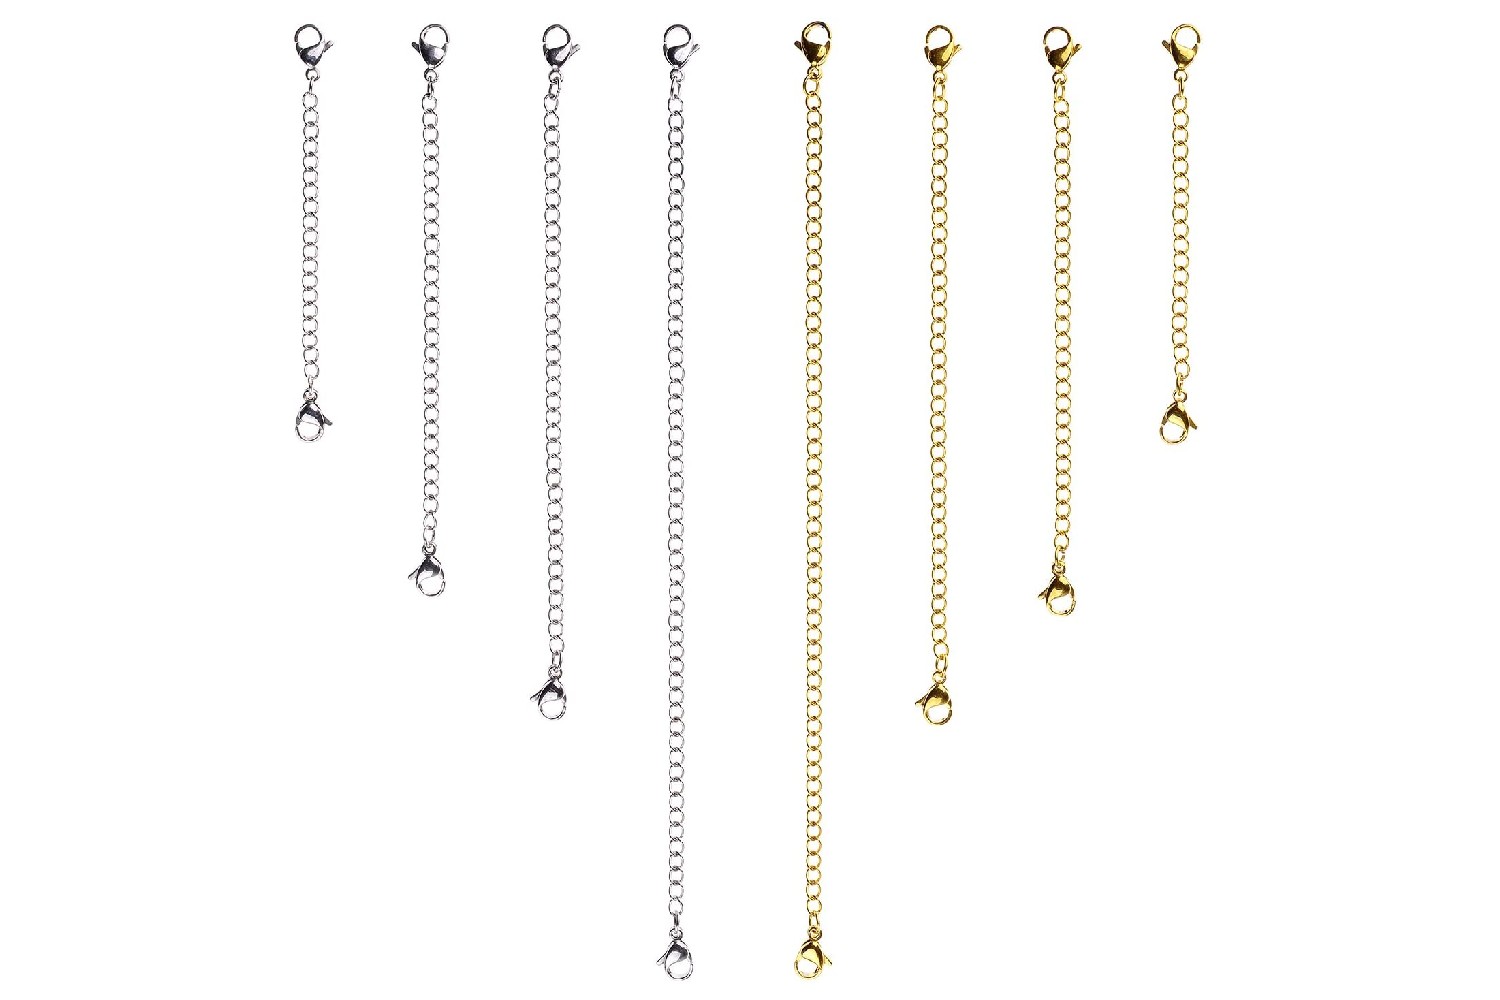 Thunaraz 12pcs Stainless Steel Thin Delicate Necklace Extender Set Chain Necklace Extenders with 2 Lobster Clasps 2 2.7 4 6 